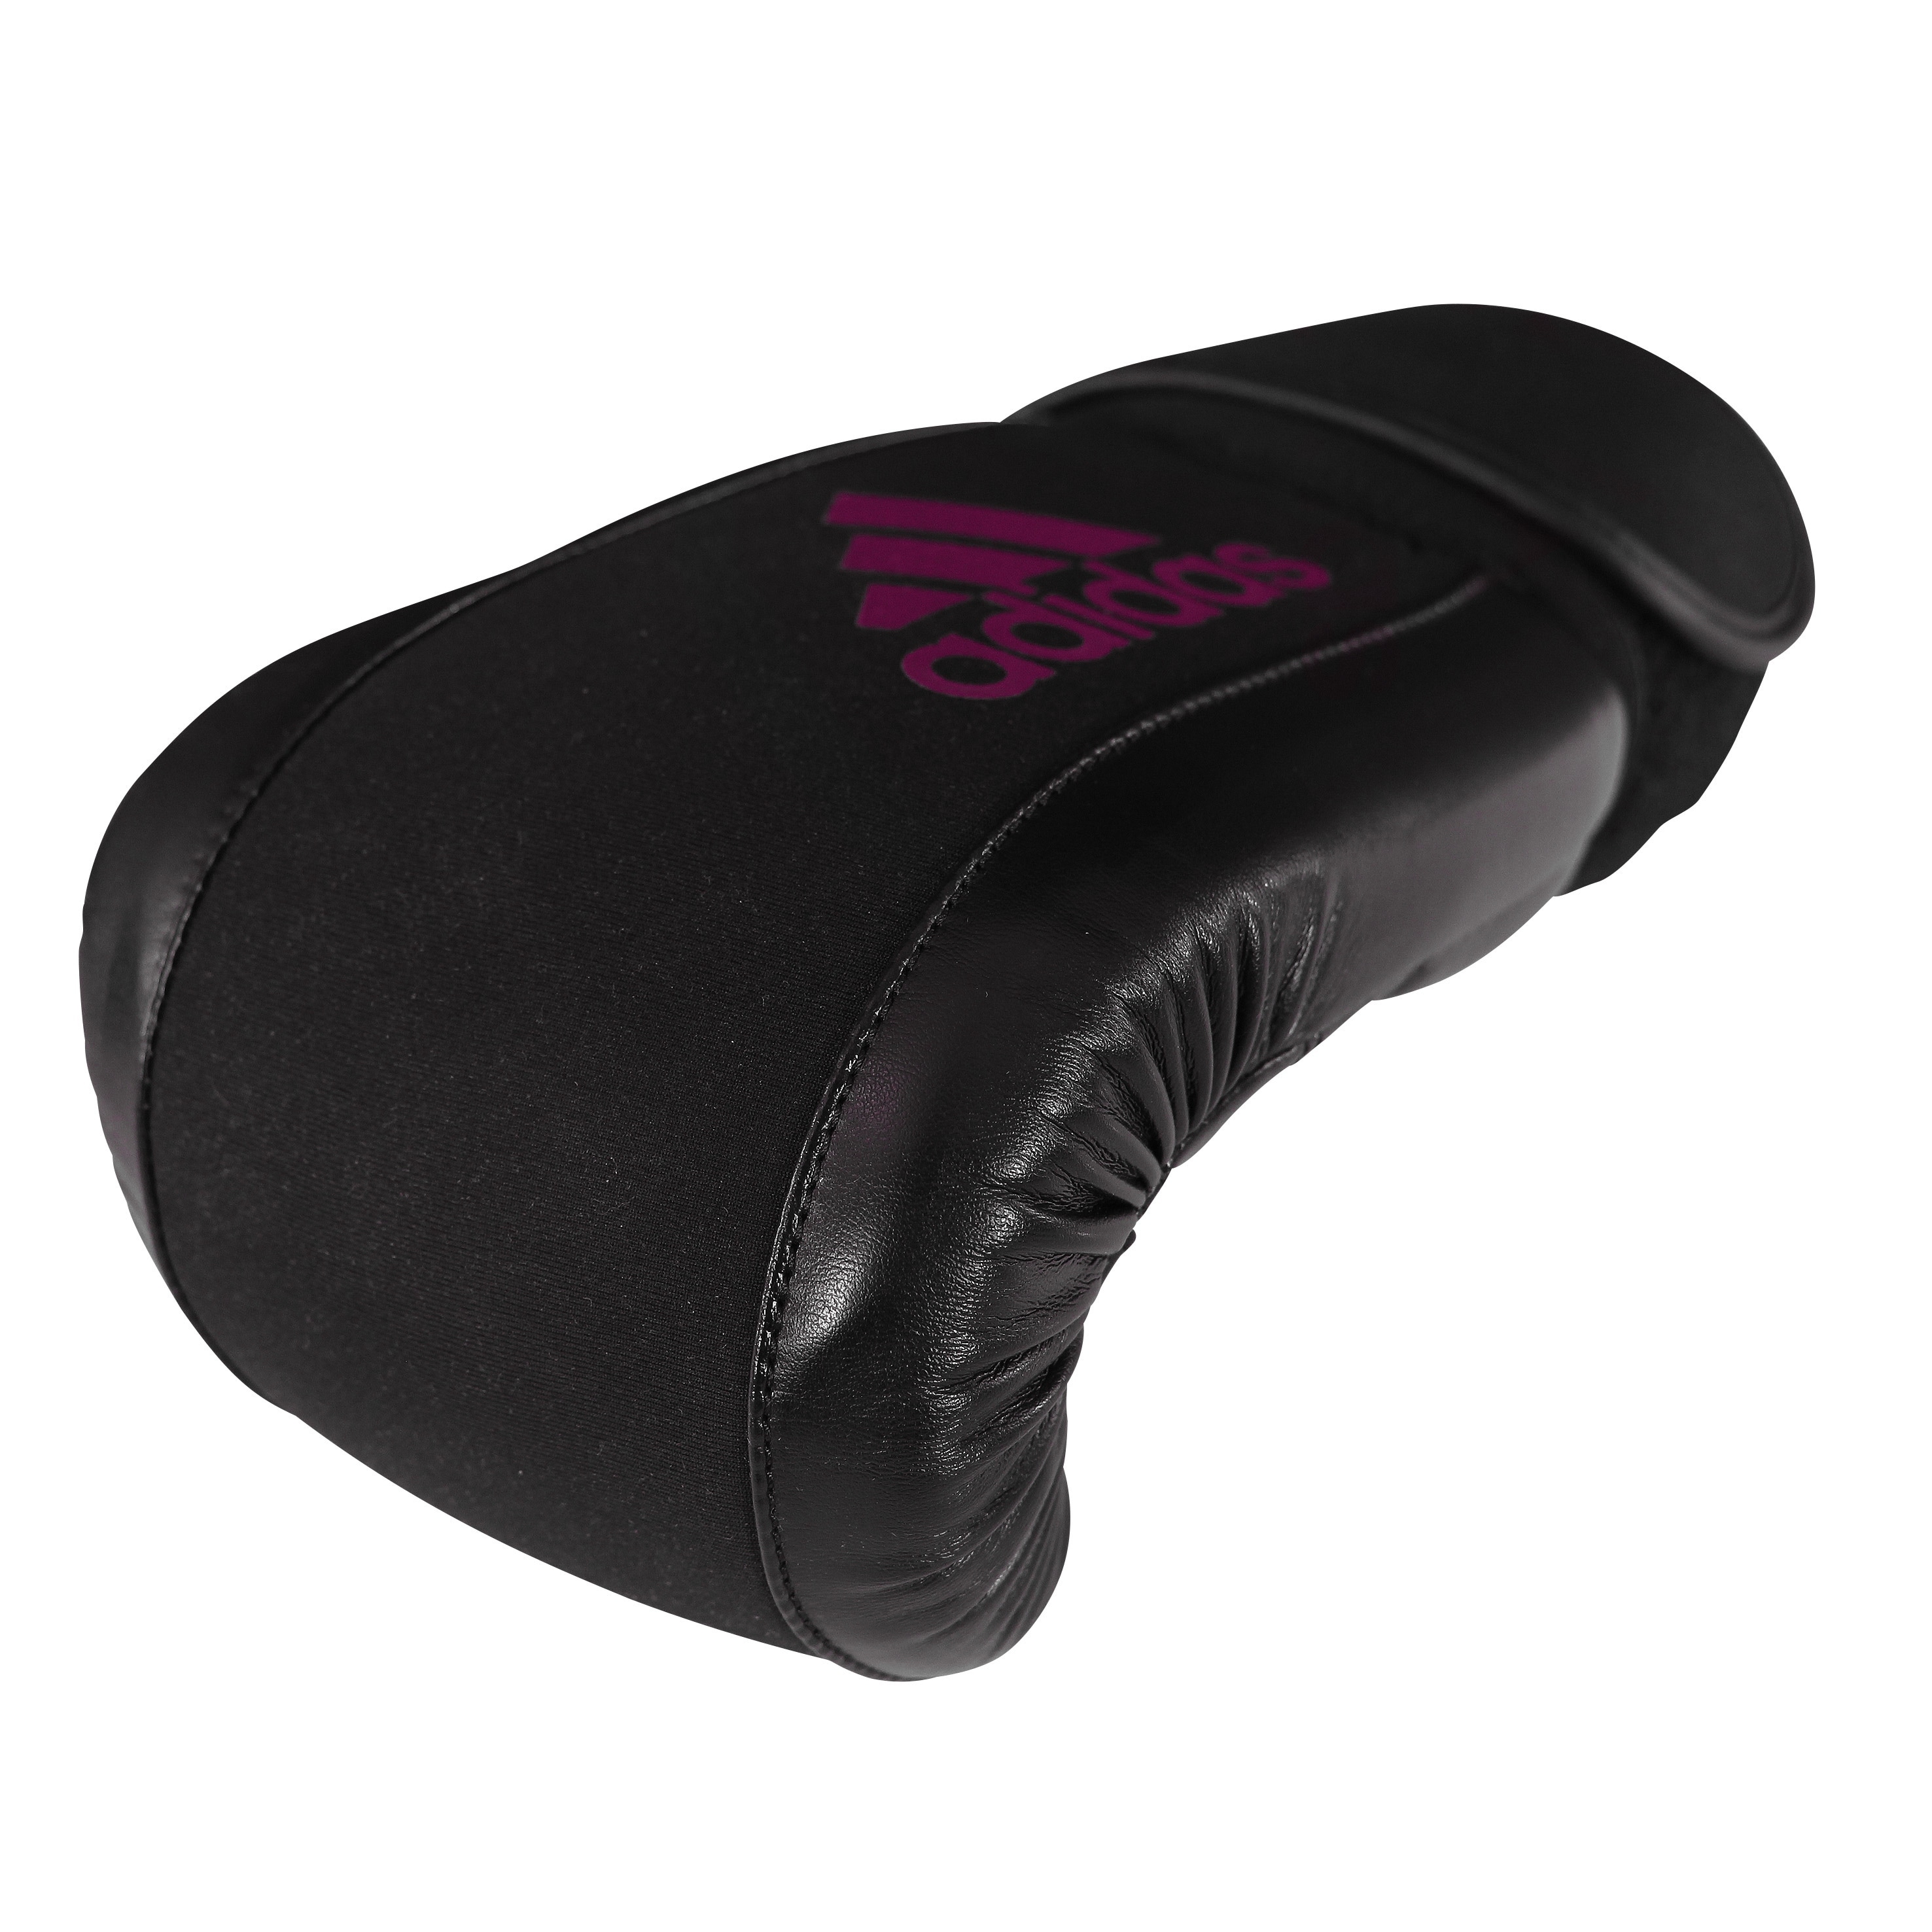 & Gloves Beyond Washable 29065439 adidas Bath - - Bed Boxing